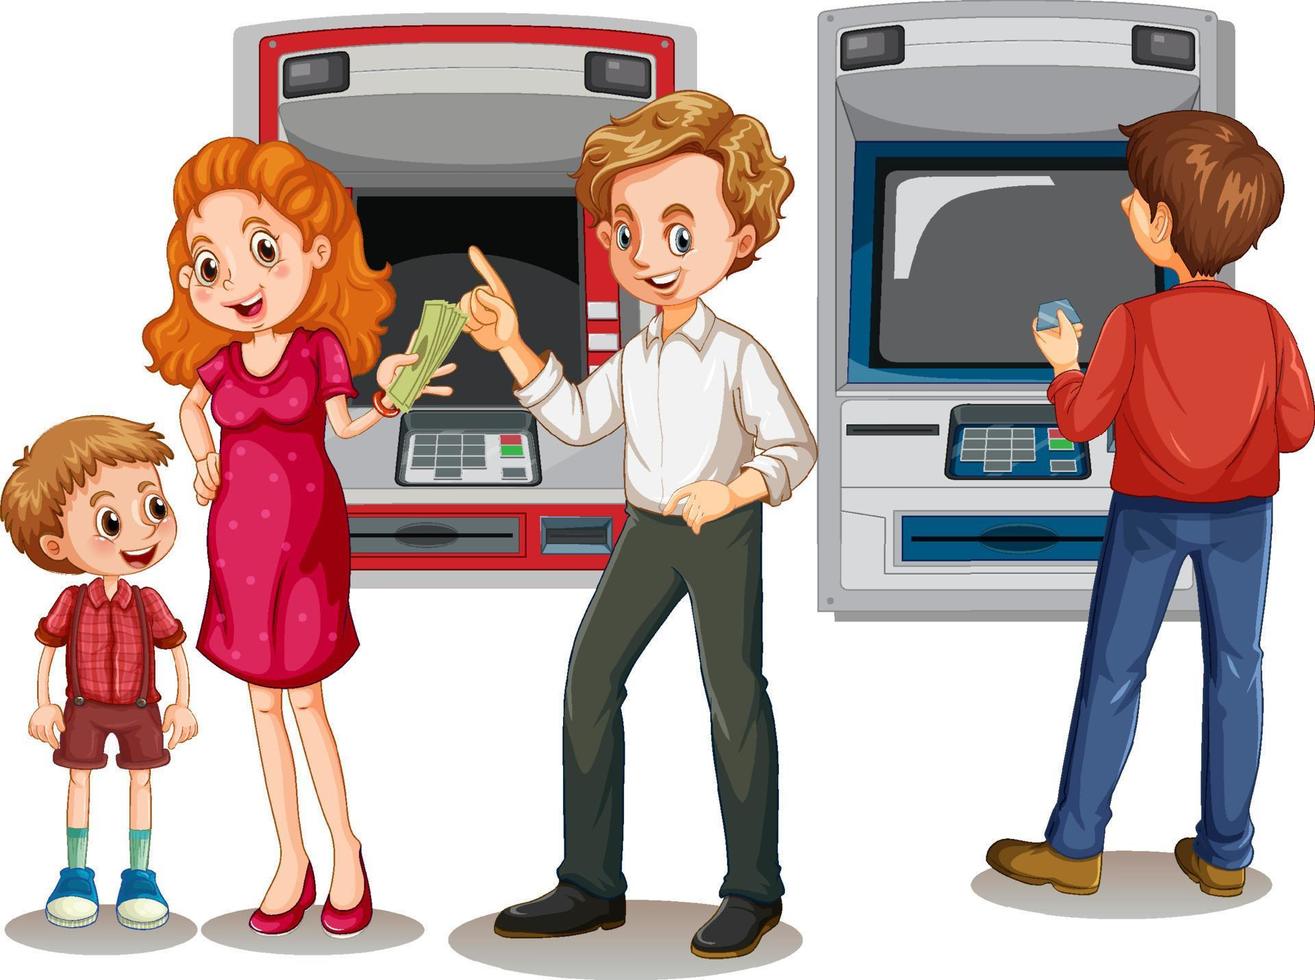 ATM machine with people cartoon character vector